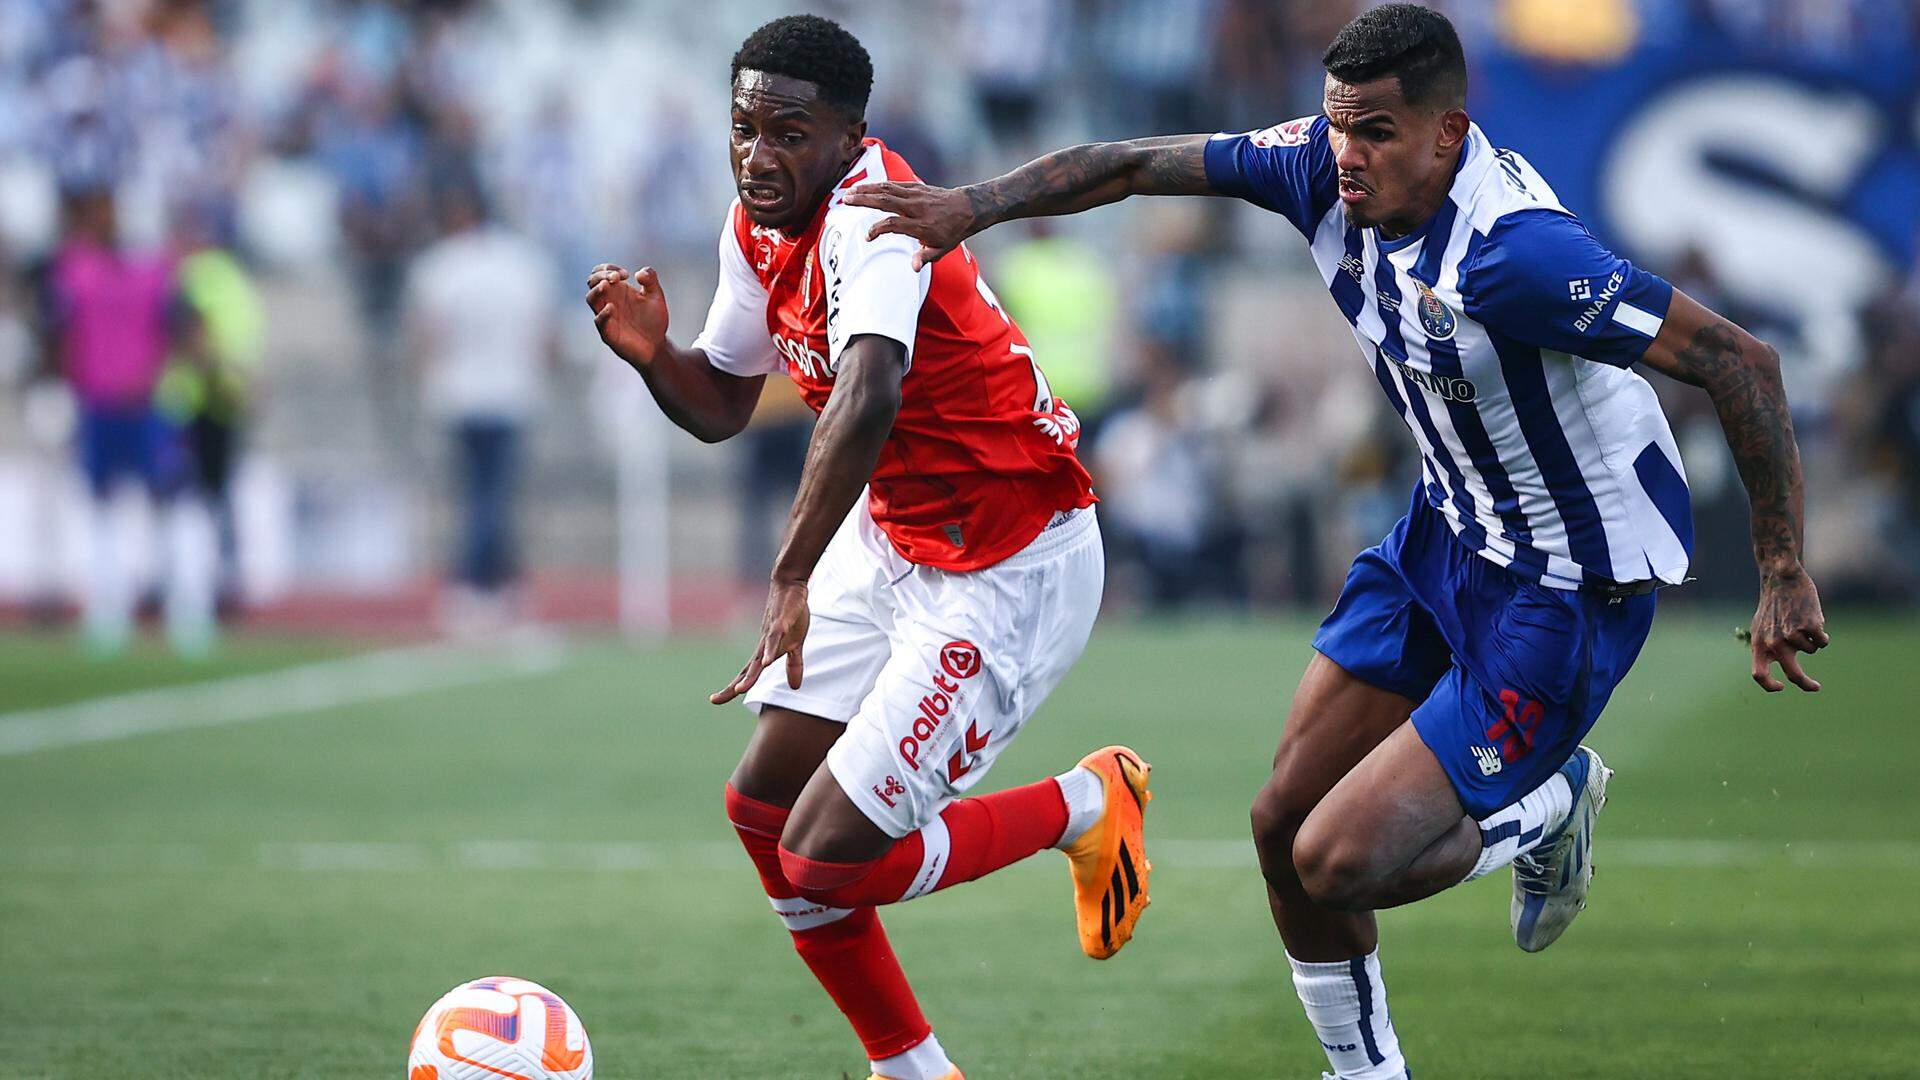 SC Braga´s Mendes (L) fights for the ball with FC Porto's Galeno (R) during the Portugal Cup final soccer match held at Jamor National stadium in Oeiras, outskirts of Lisbon, Portugal, 04 June 2023. RODRIGO ANTUNES/LUSA